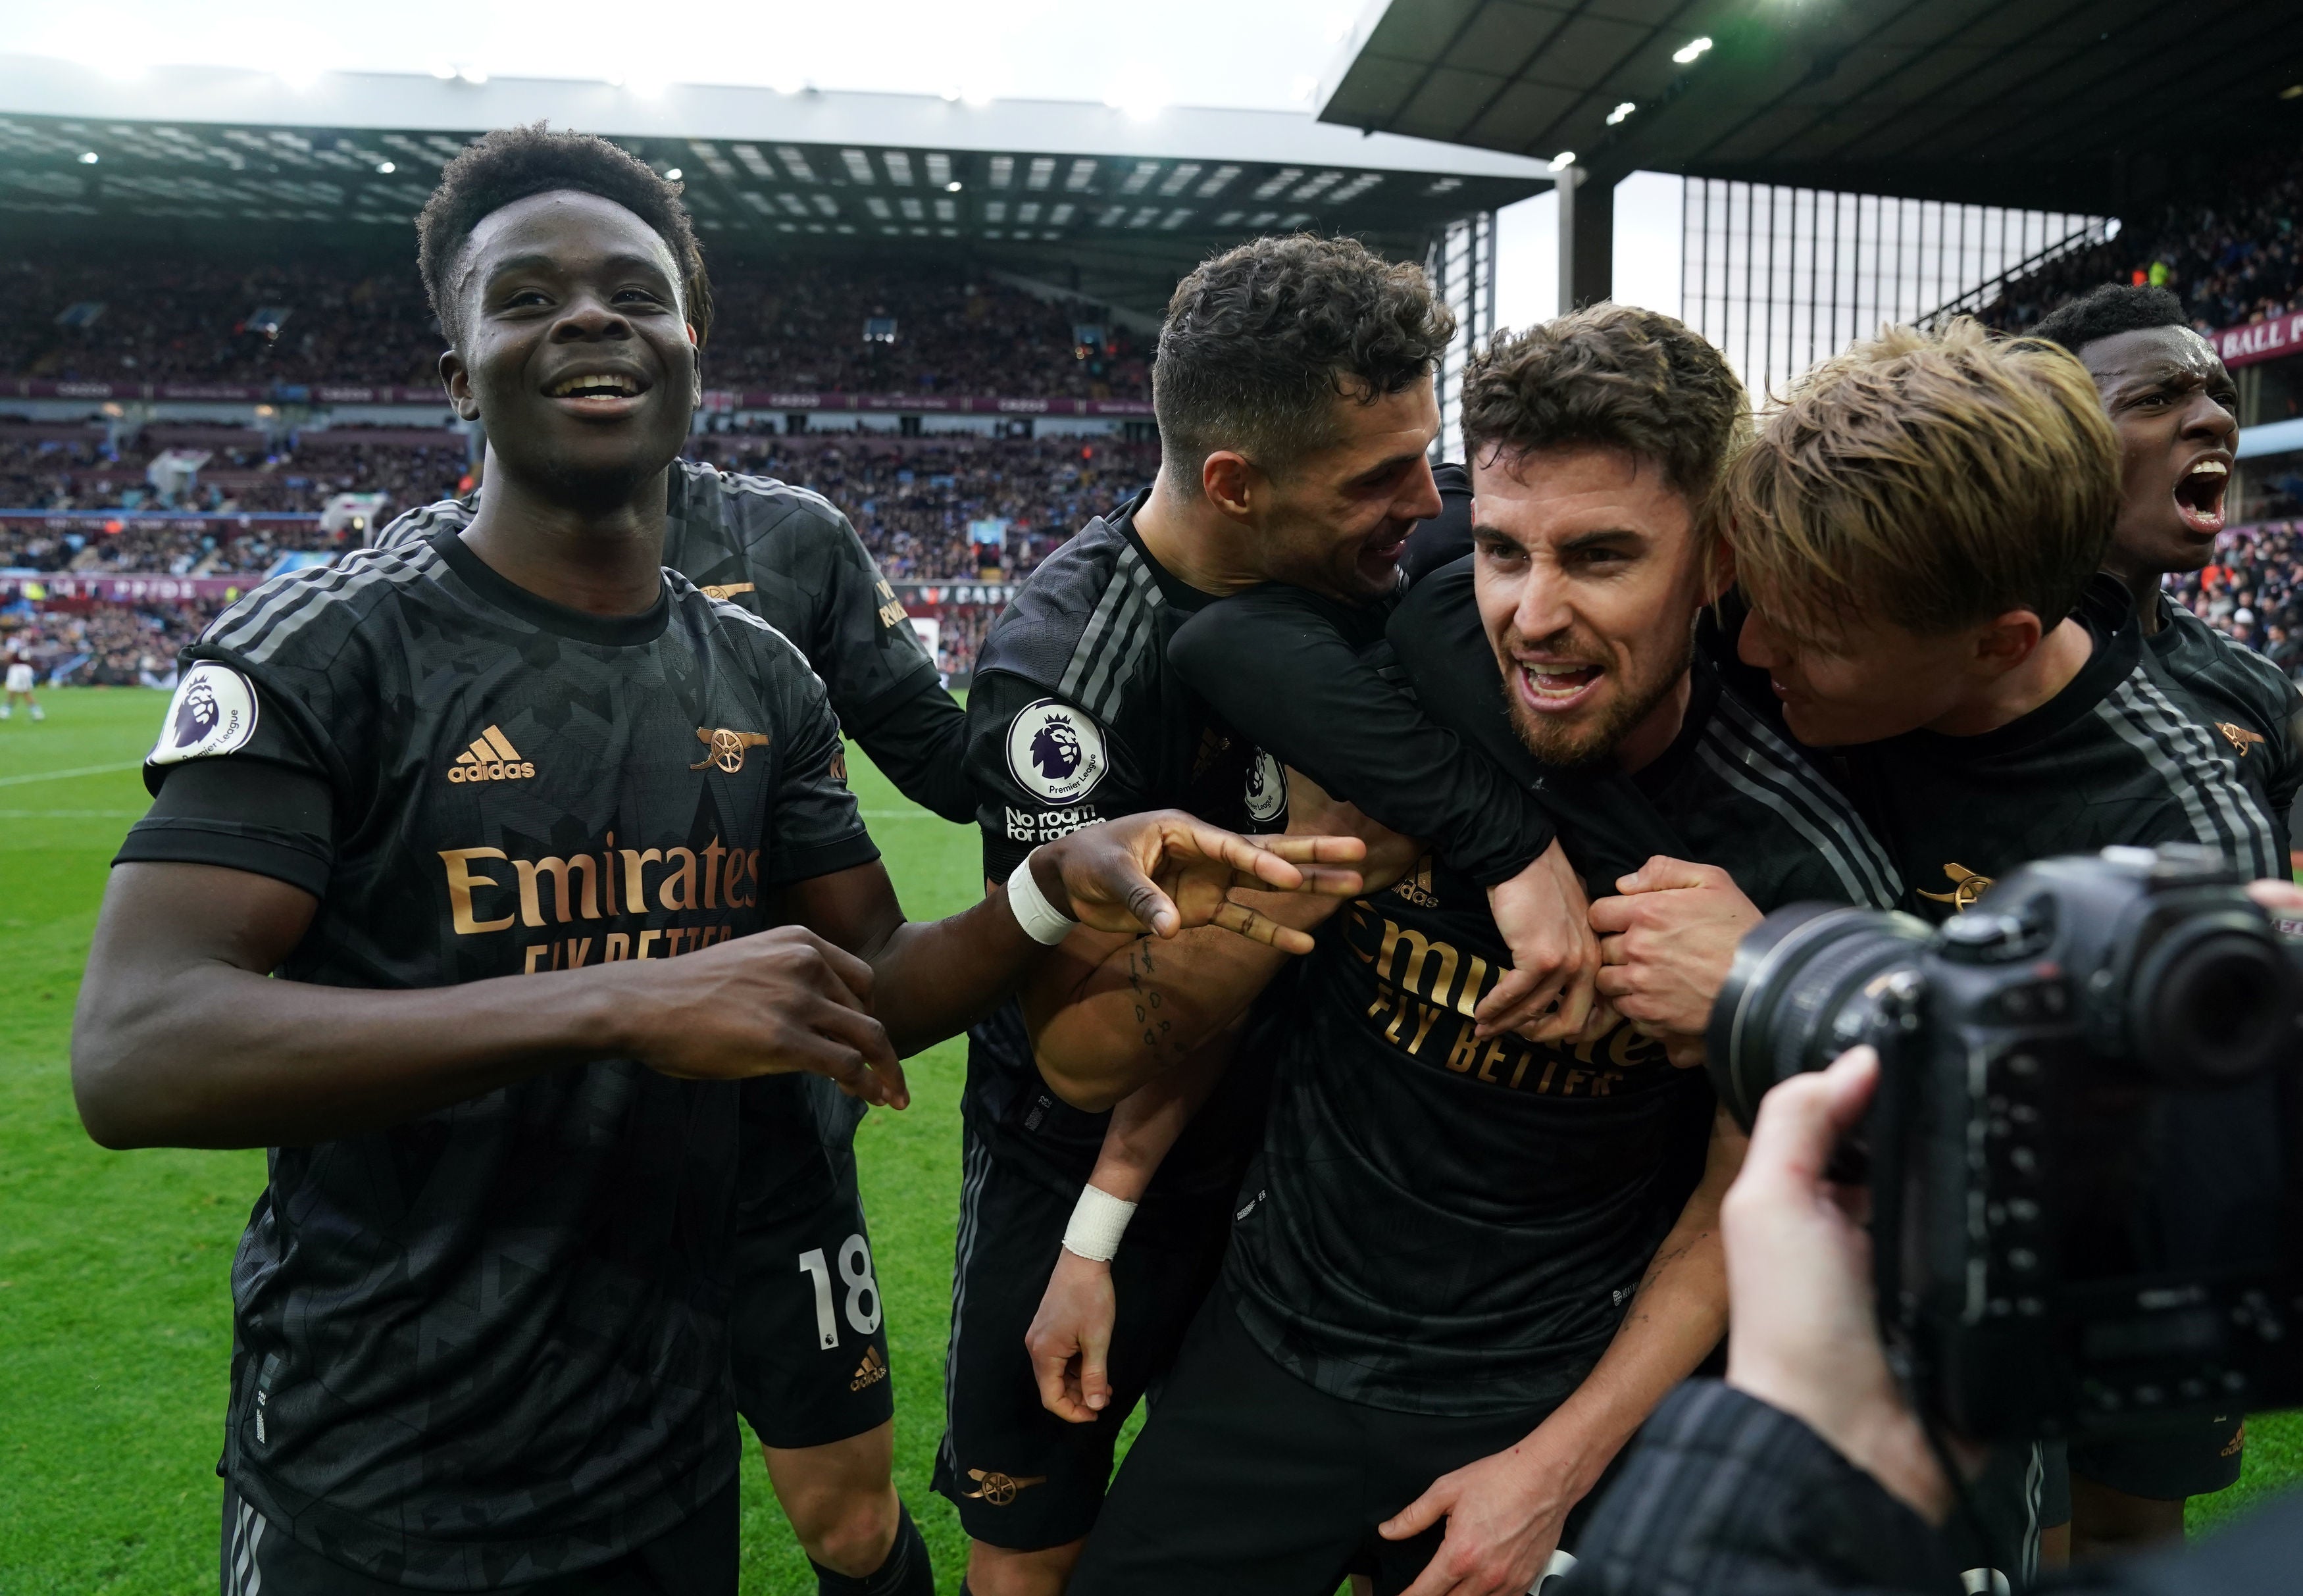 Arsenal vs Manchester United result: Final score, goals, highlights and  Premier League match report